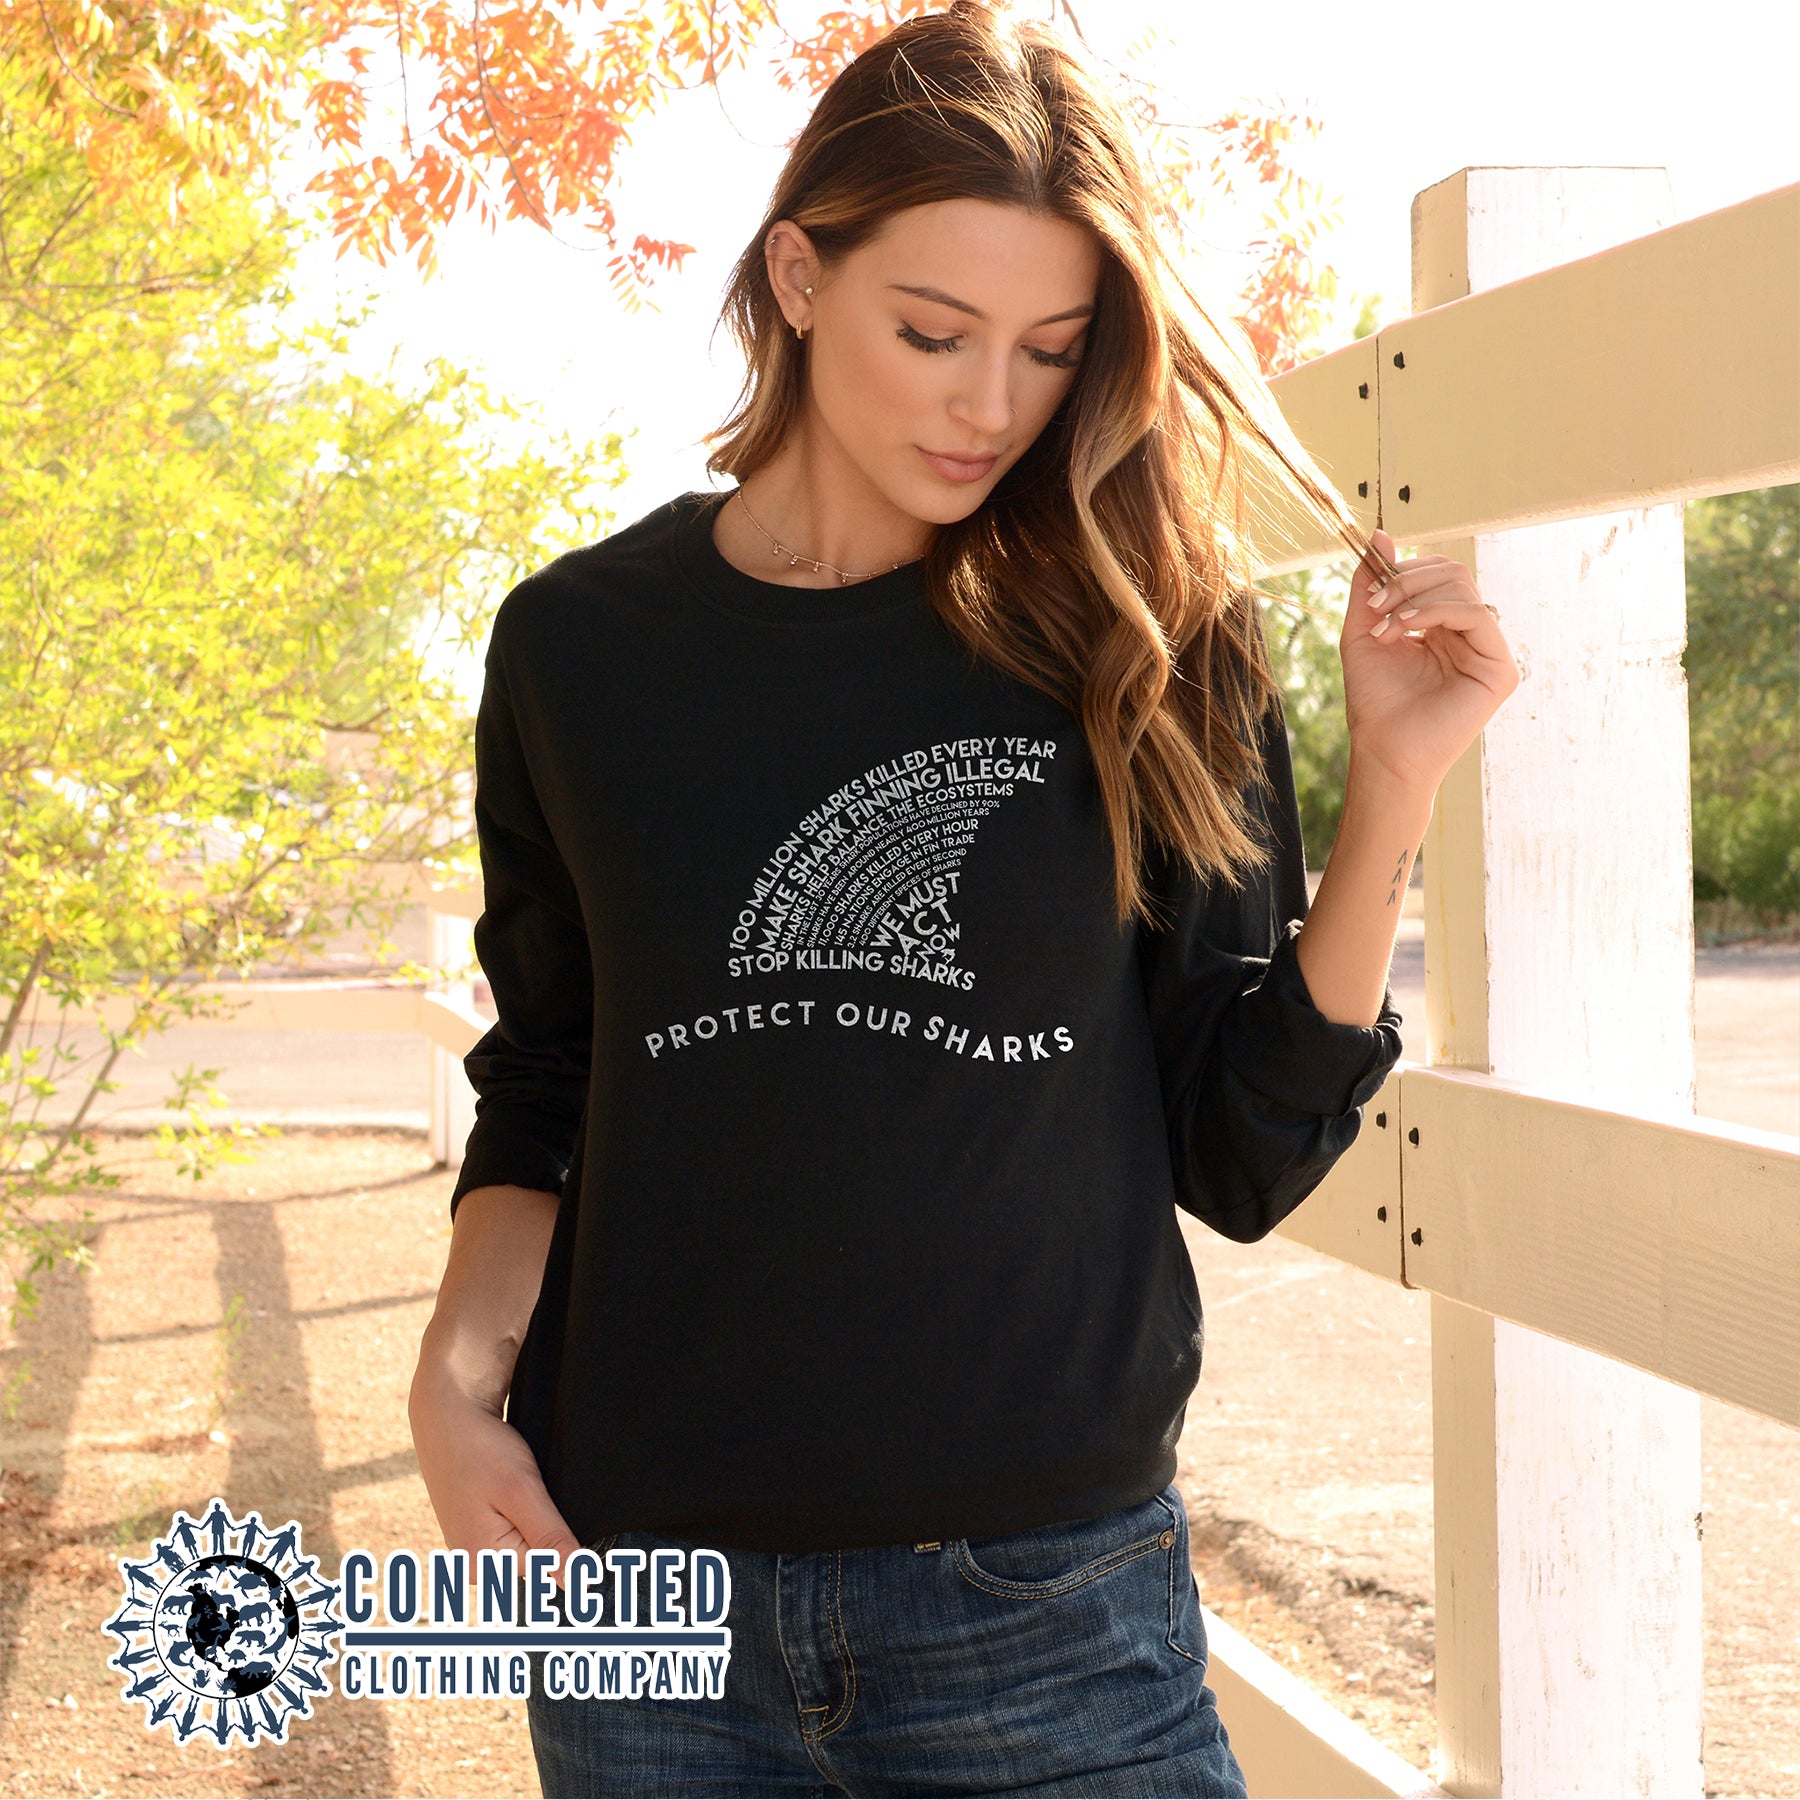 Black Protect Our Sharks Long-Sleeve Tee - Connected Clothing Company - Ethically and Sustainably Made - 10% donated to Oceana shark conservation